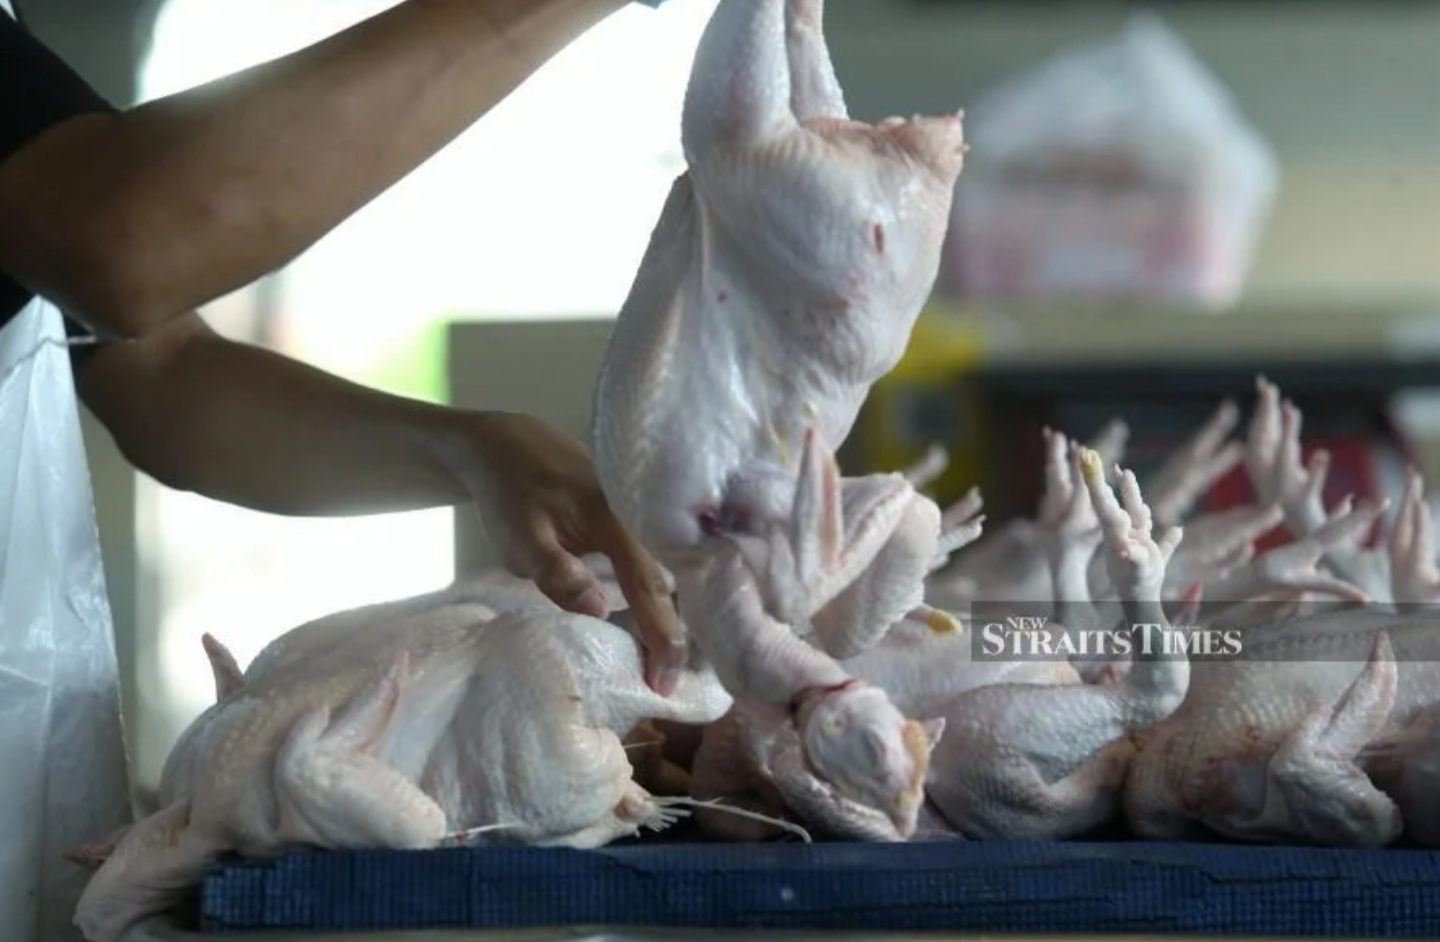 Wholesalers, retailers asked to engage with chicken breeders over price hikes